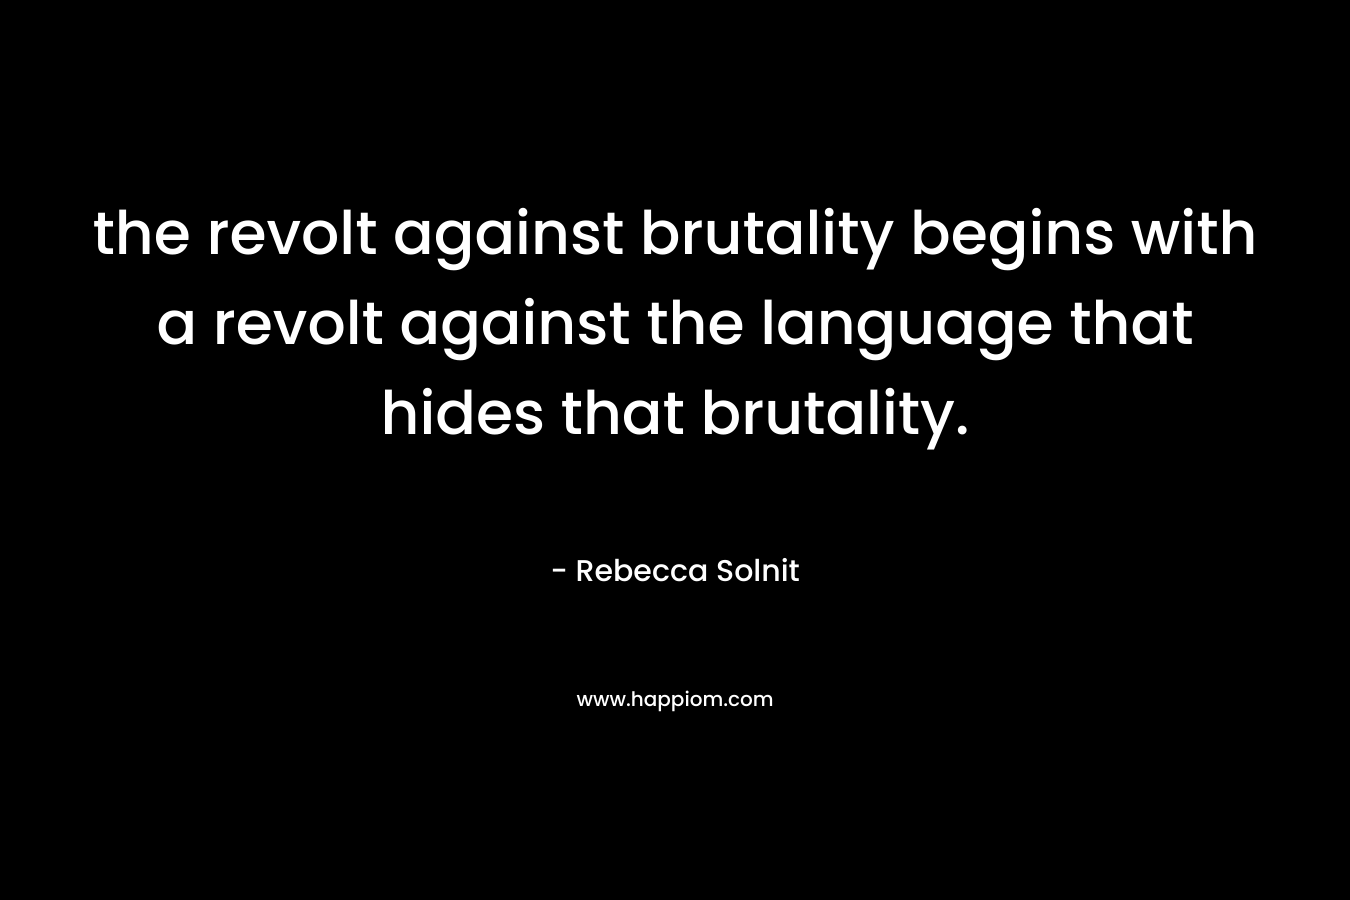 the revolt against brutality begins with a revolt against the language that hides that brutality. – Rebecca Solnit